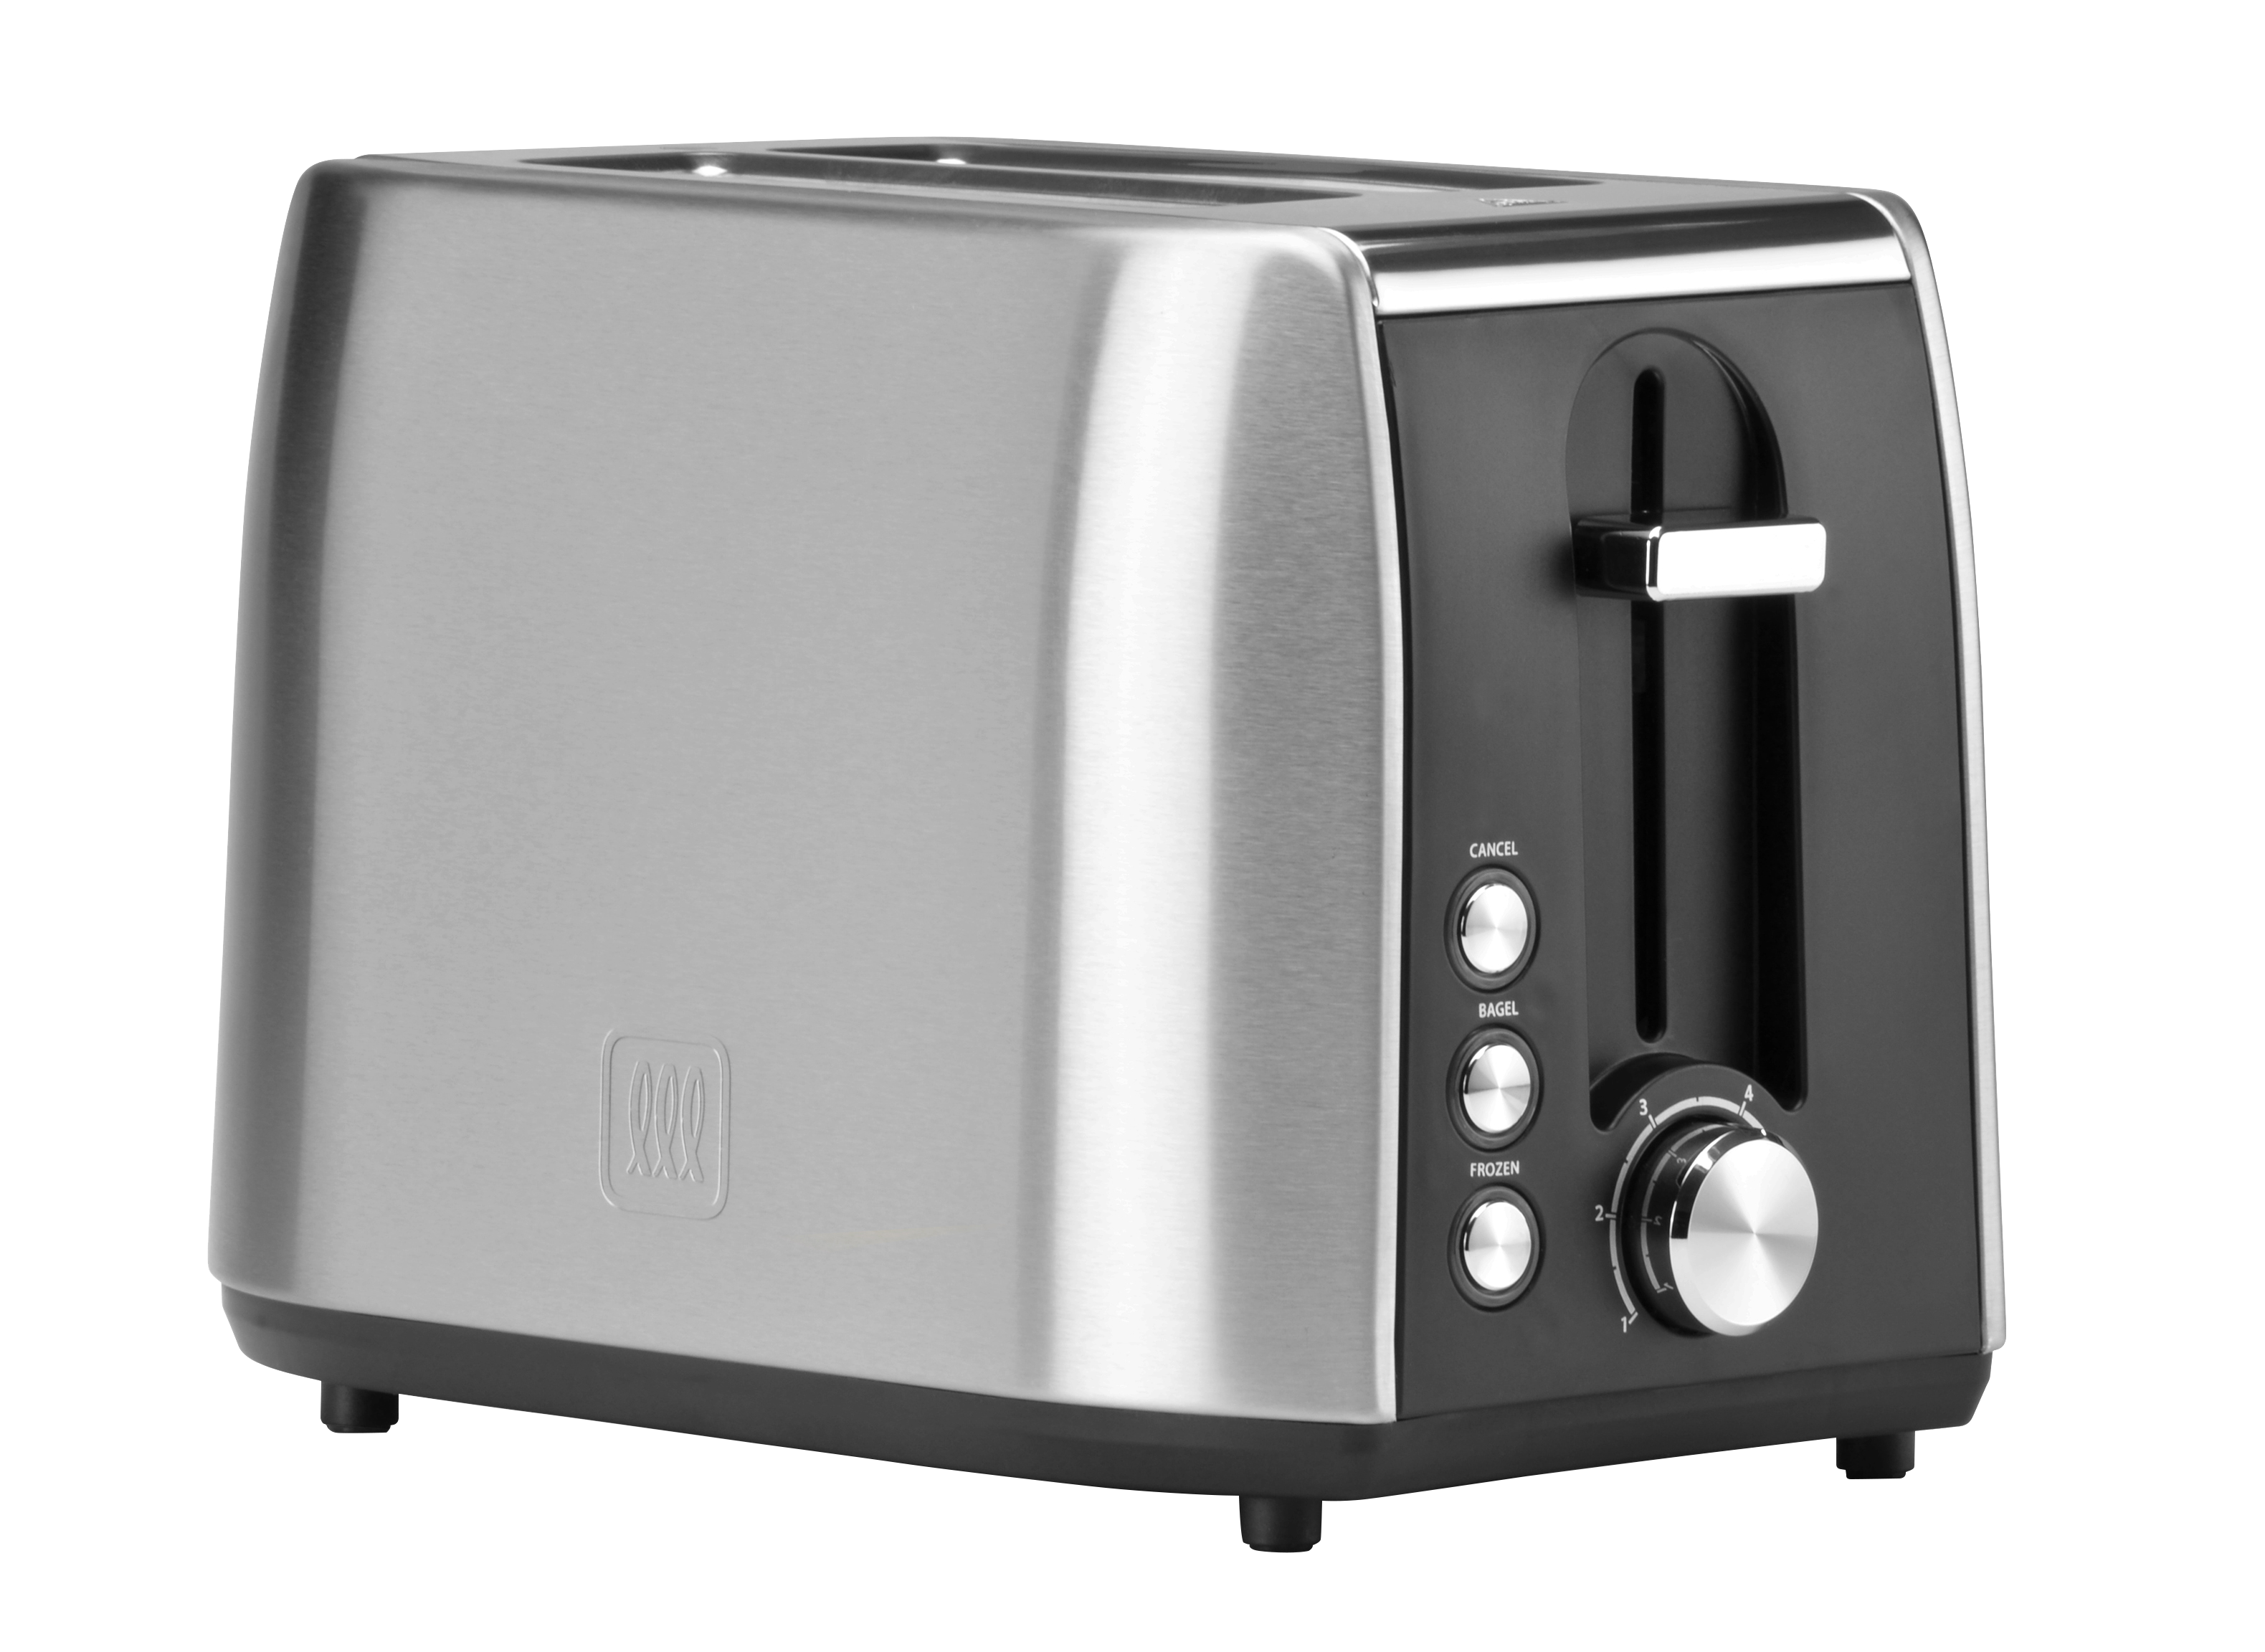 https://crdms.images.consumerreports.org/prod/products/cr/models/406541-2-slice-toasters-toastmaster-two-slice-toaster-10029675.png